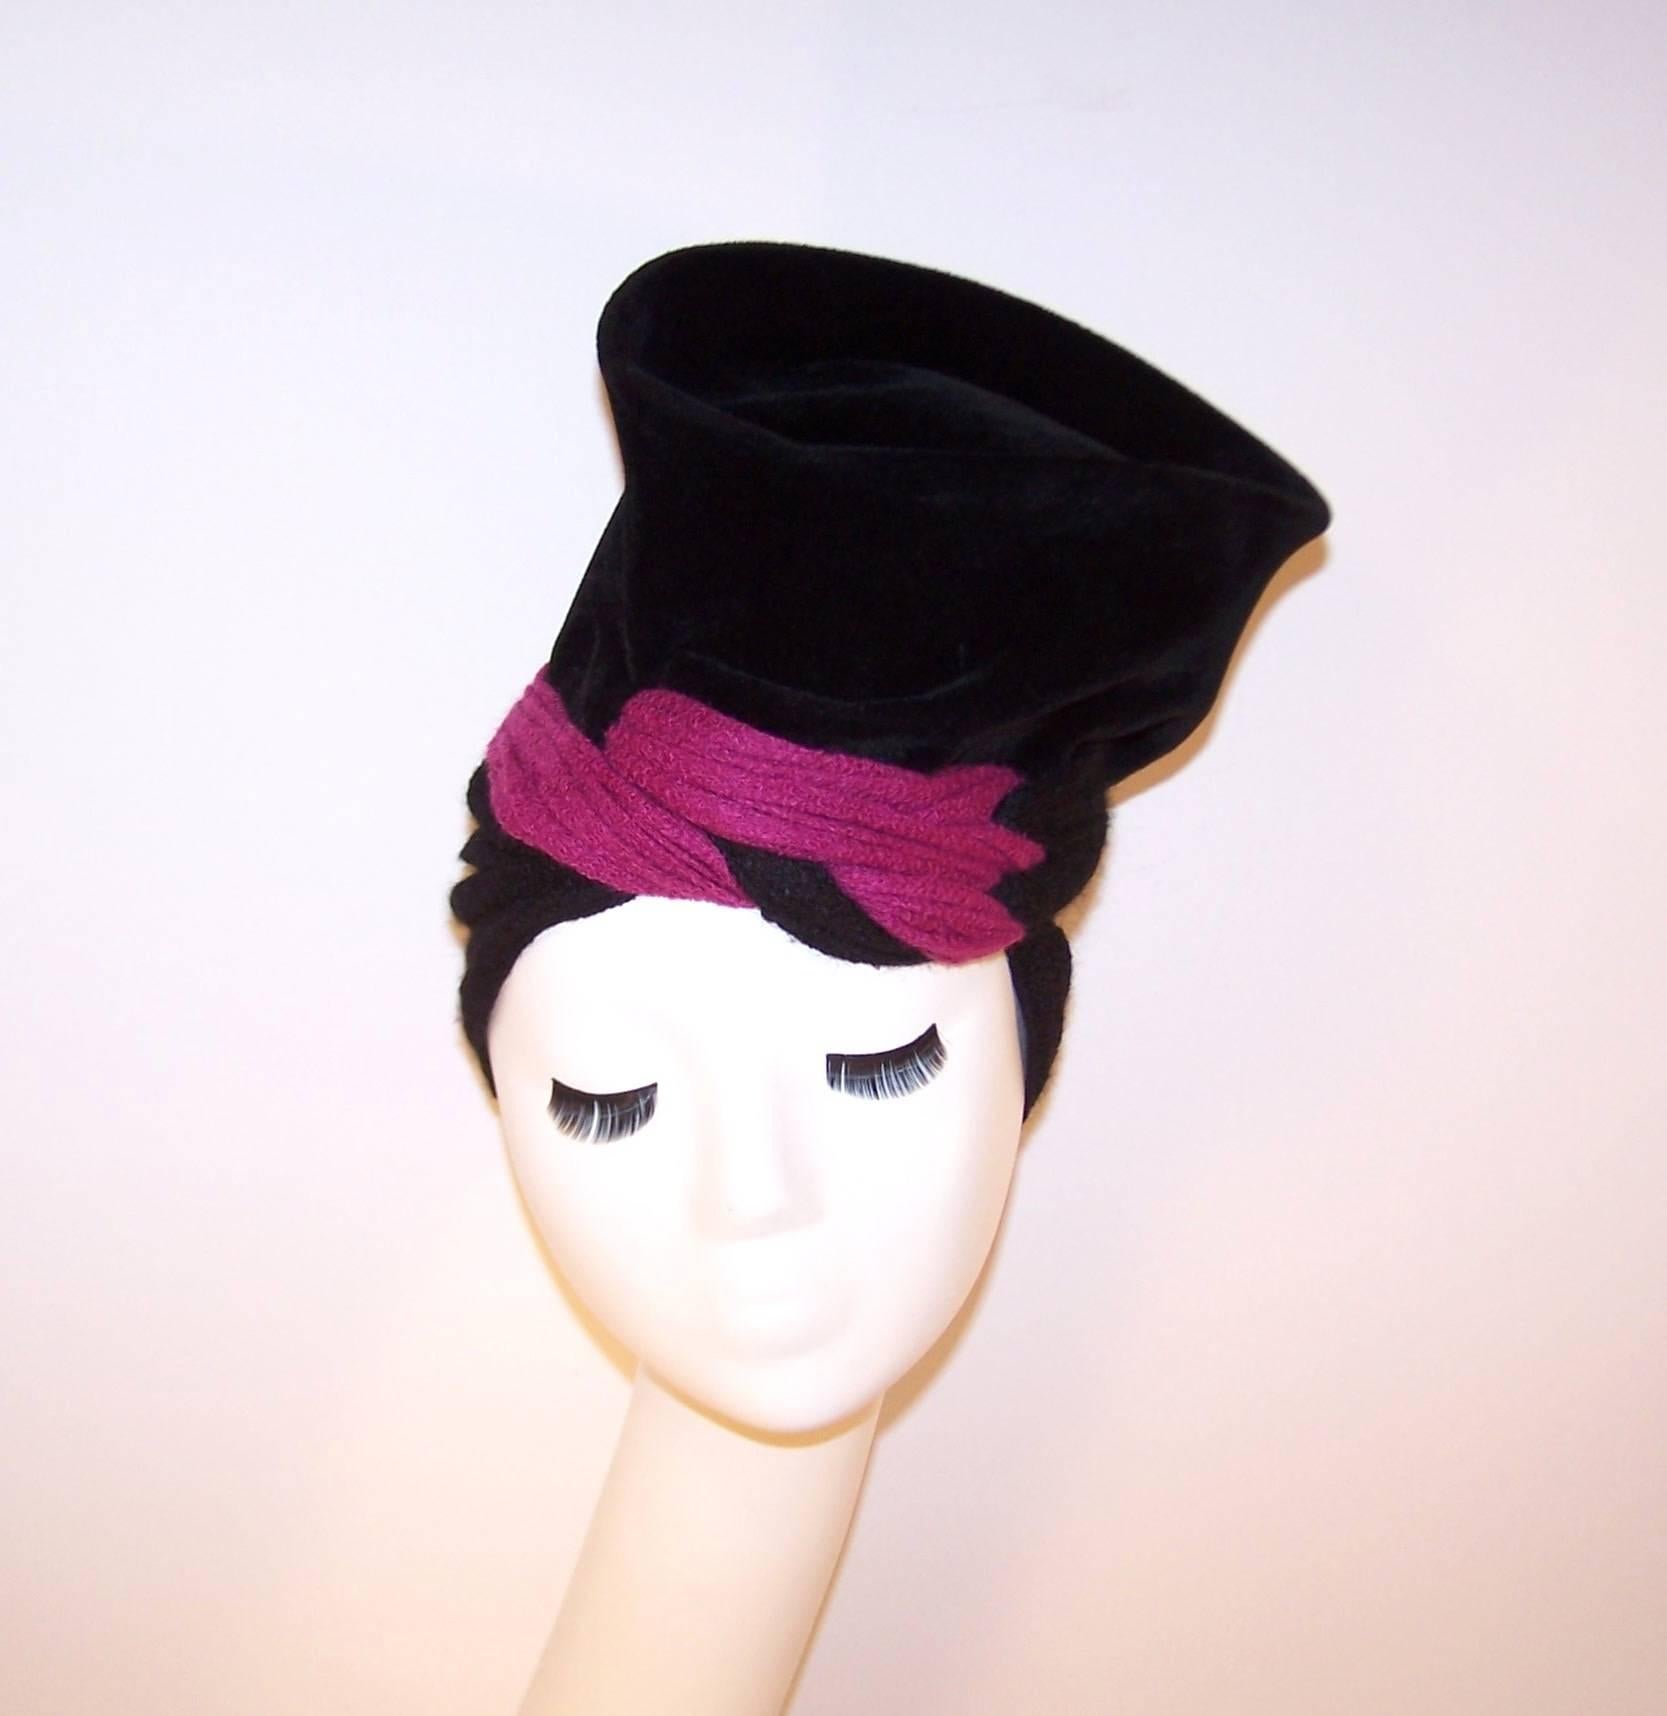 You are going to have so much fun with this hat!  The soft velvet body stands tall with a sculptural shape and the stretchy wool knit snood anchors everything in place.  The fuchsia pink color pop is an added bonus and makes this avant-garde hat a